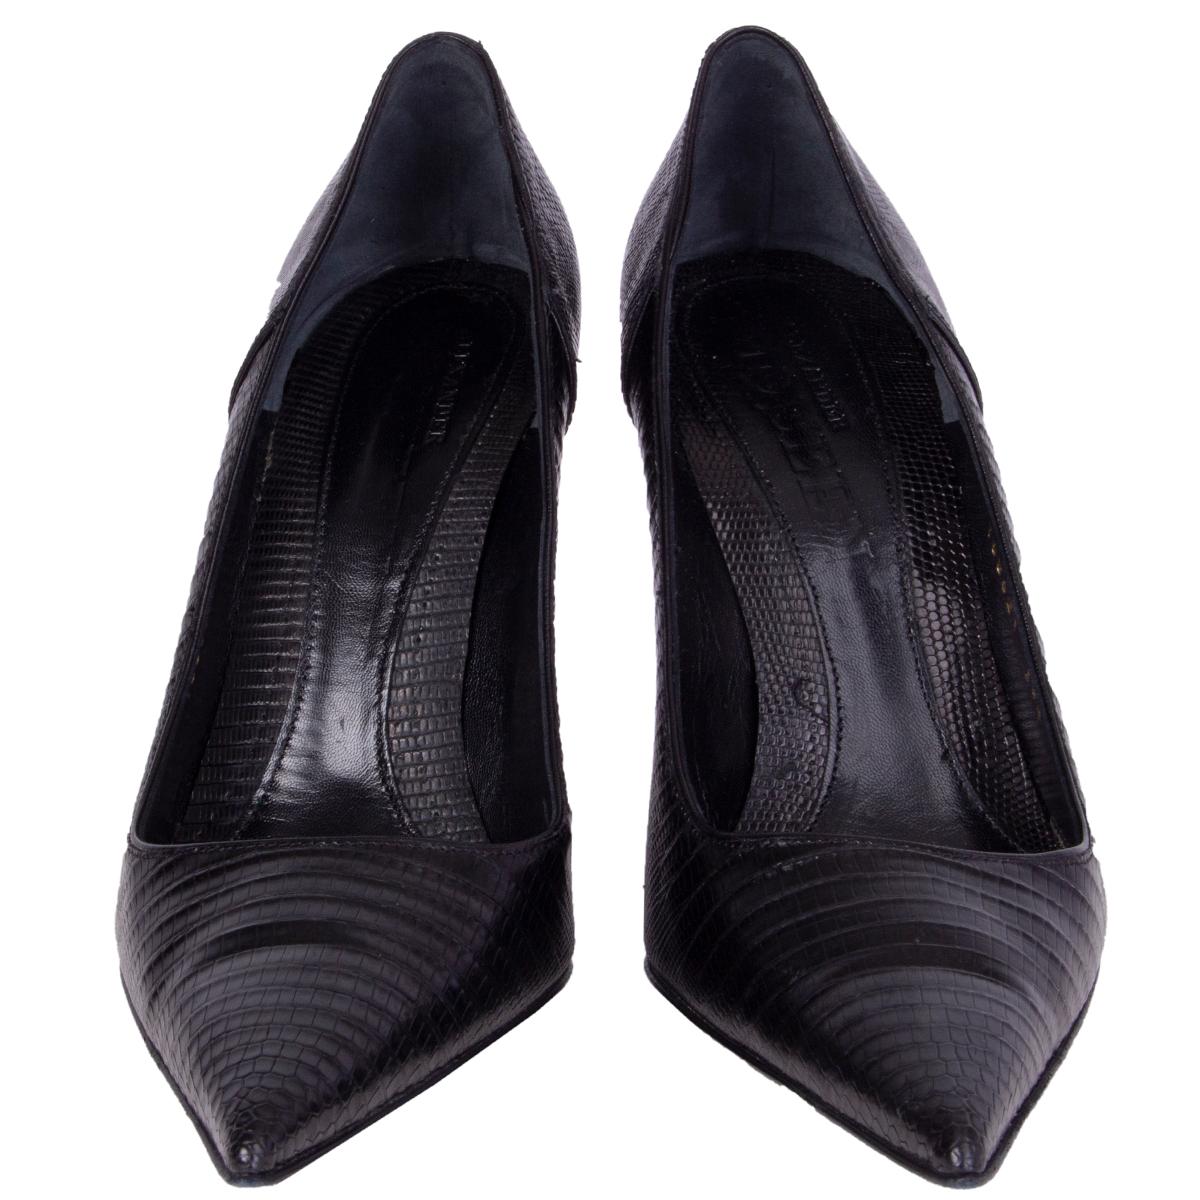 100% authentic Alexander McQueen pointed-toe pumps in black lizard embossed leather. Have been worn and are in excellent condition. Come with dust bag.

Measurements
Imprinted Size	39.5
Shoe Size	39.5
Inside Sole	26.5cm (10.3in)
Width	8cm